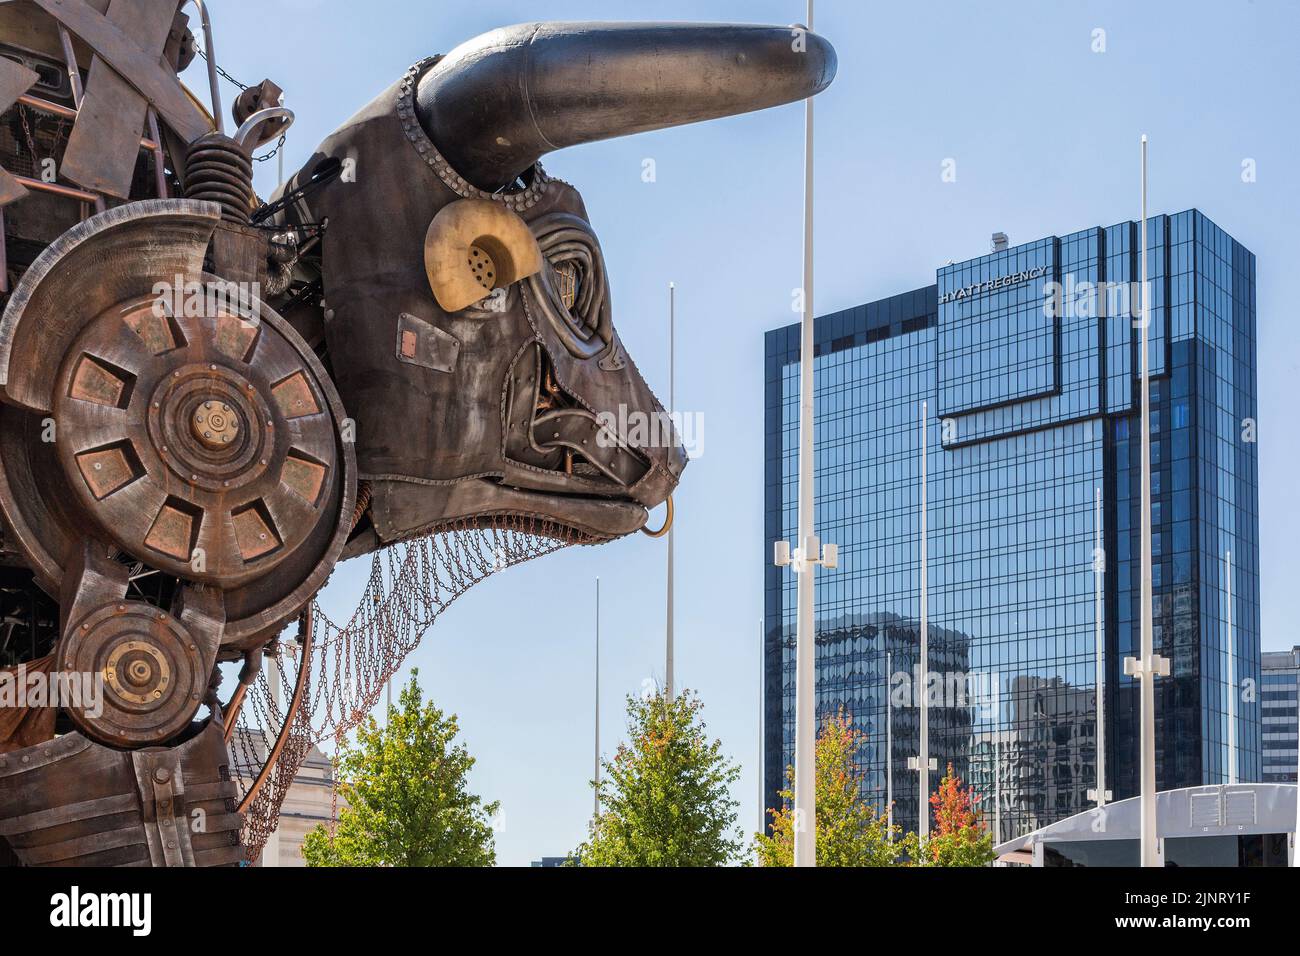 The iconic raging bull from the 2022 Commonwealth Games standing in Centenary Square and looking toward the Hyatt Regency Hotel Birmingham. Stock Photo